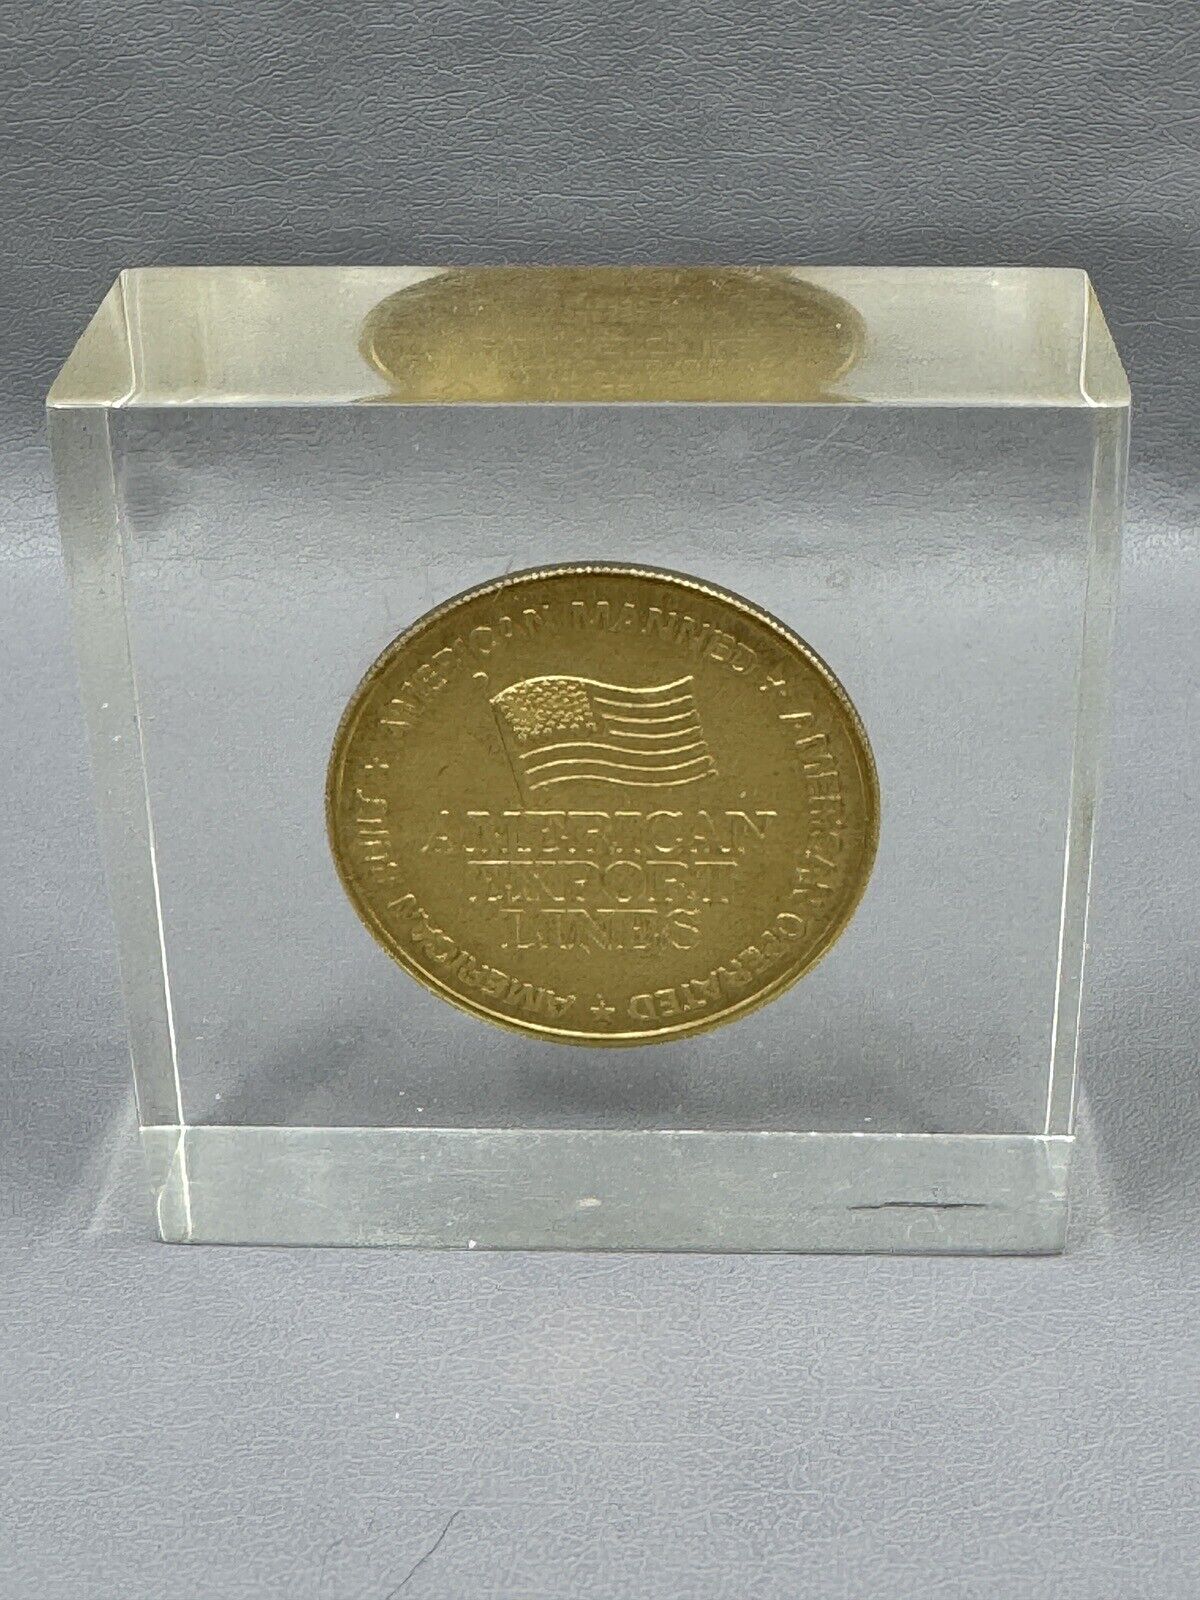 American Export Lines Coin In Resin